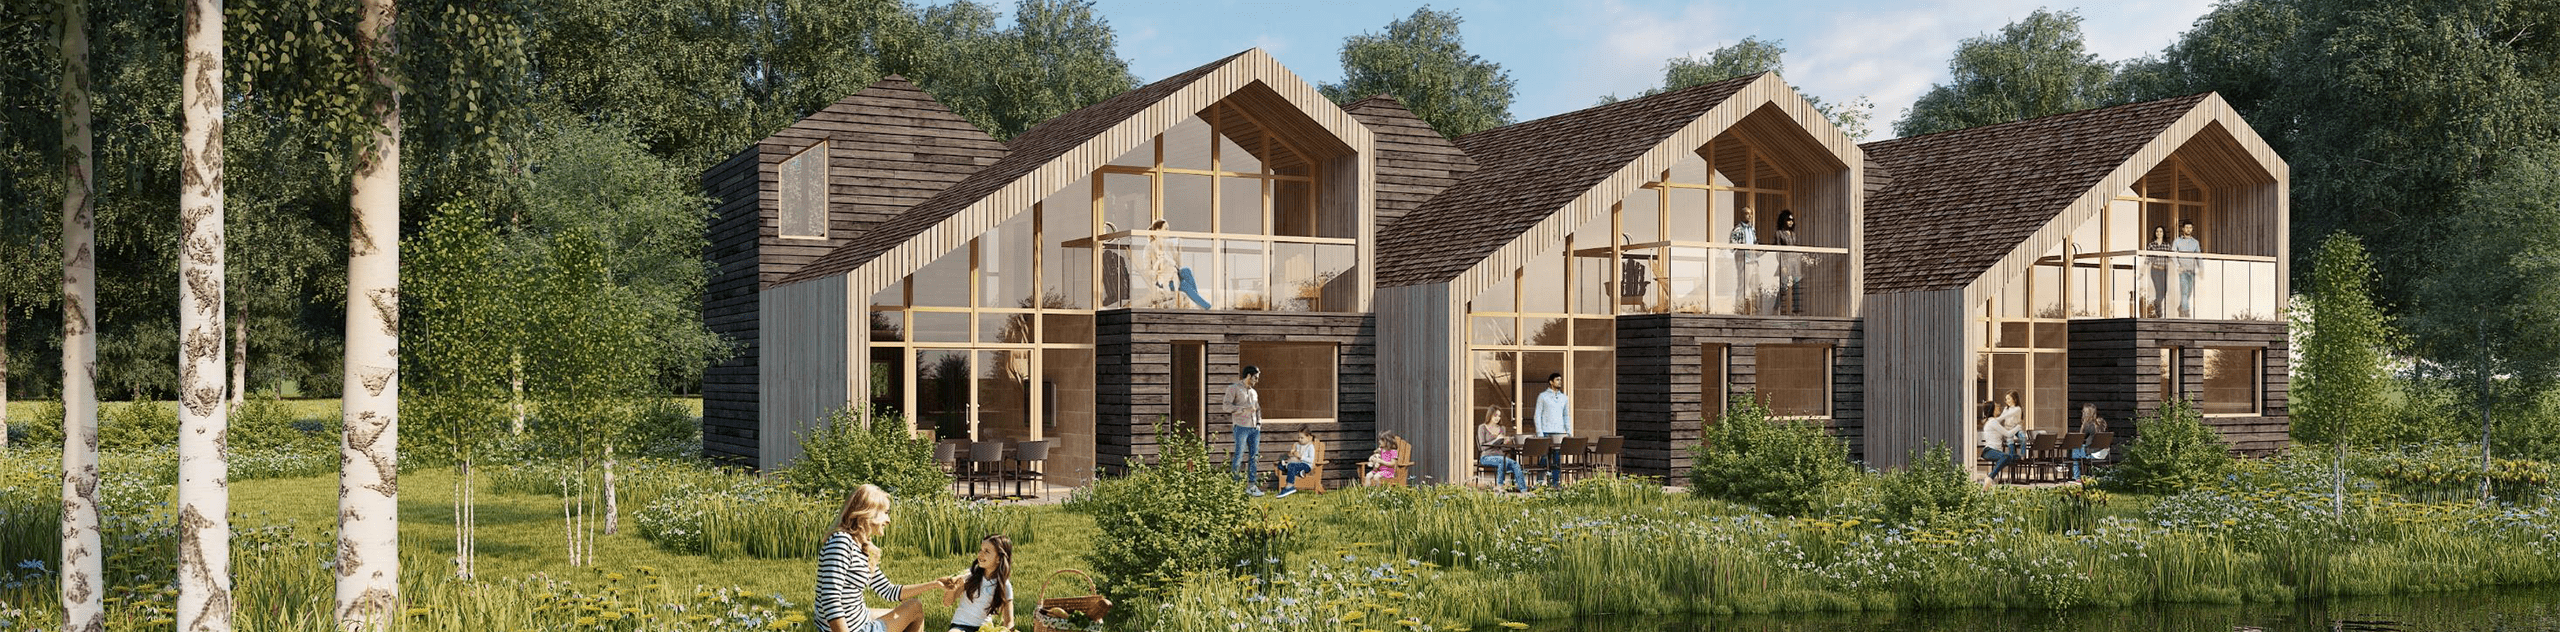 A CGI render of the lakeside lodges nestled in wetland and tree planting. © HMA